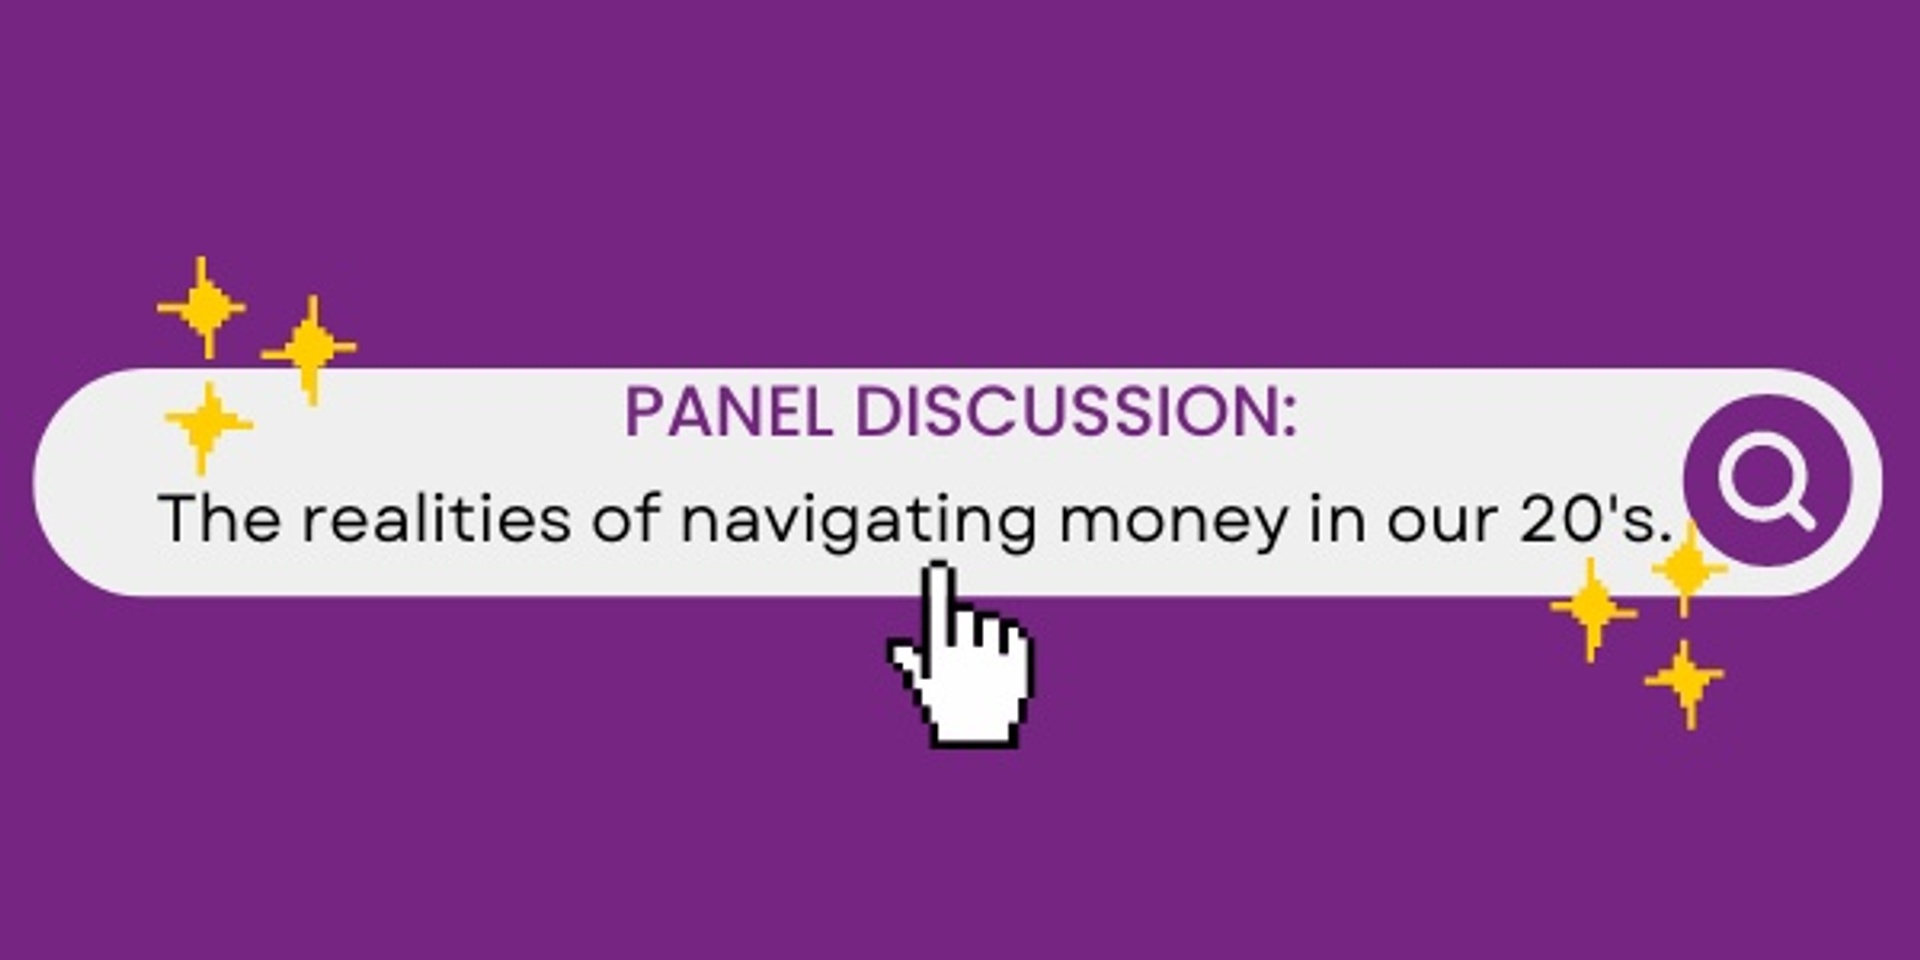 The realities of navigating money in our 20s - Breakfast Panel